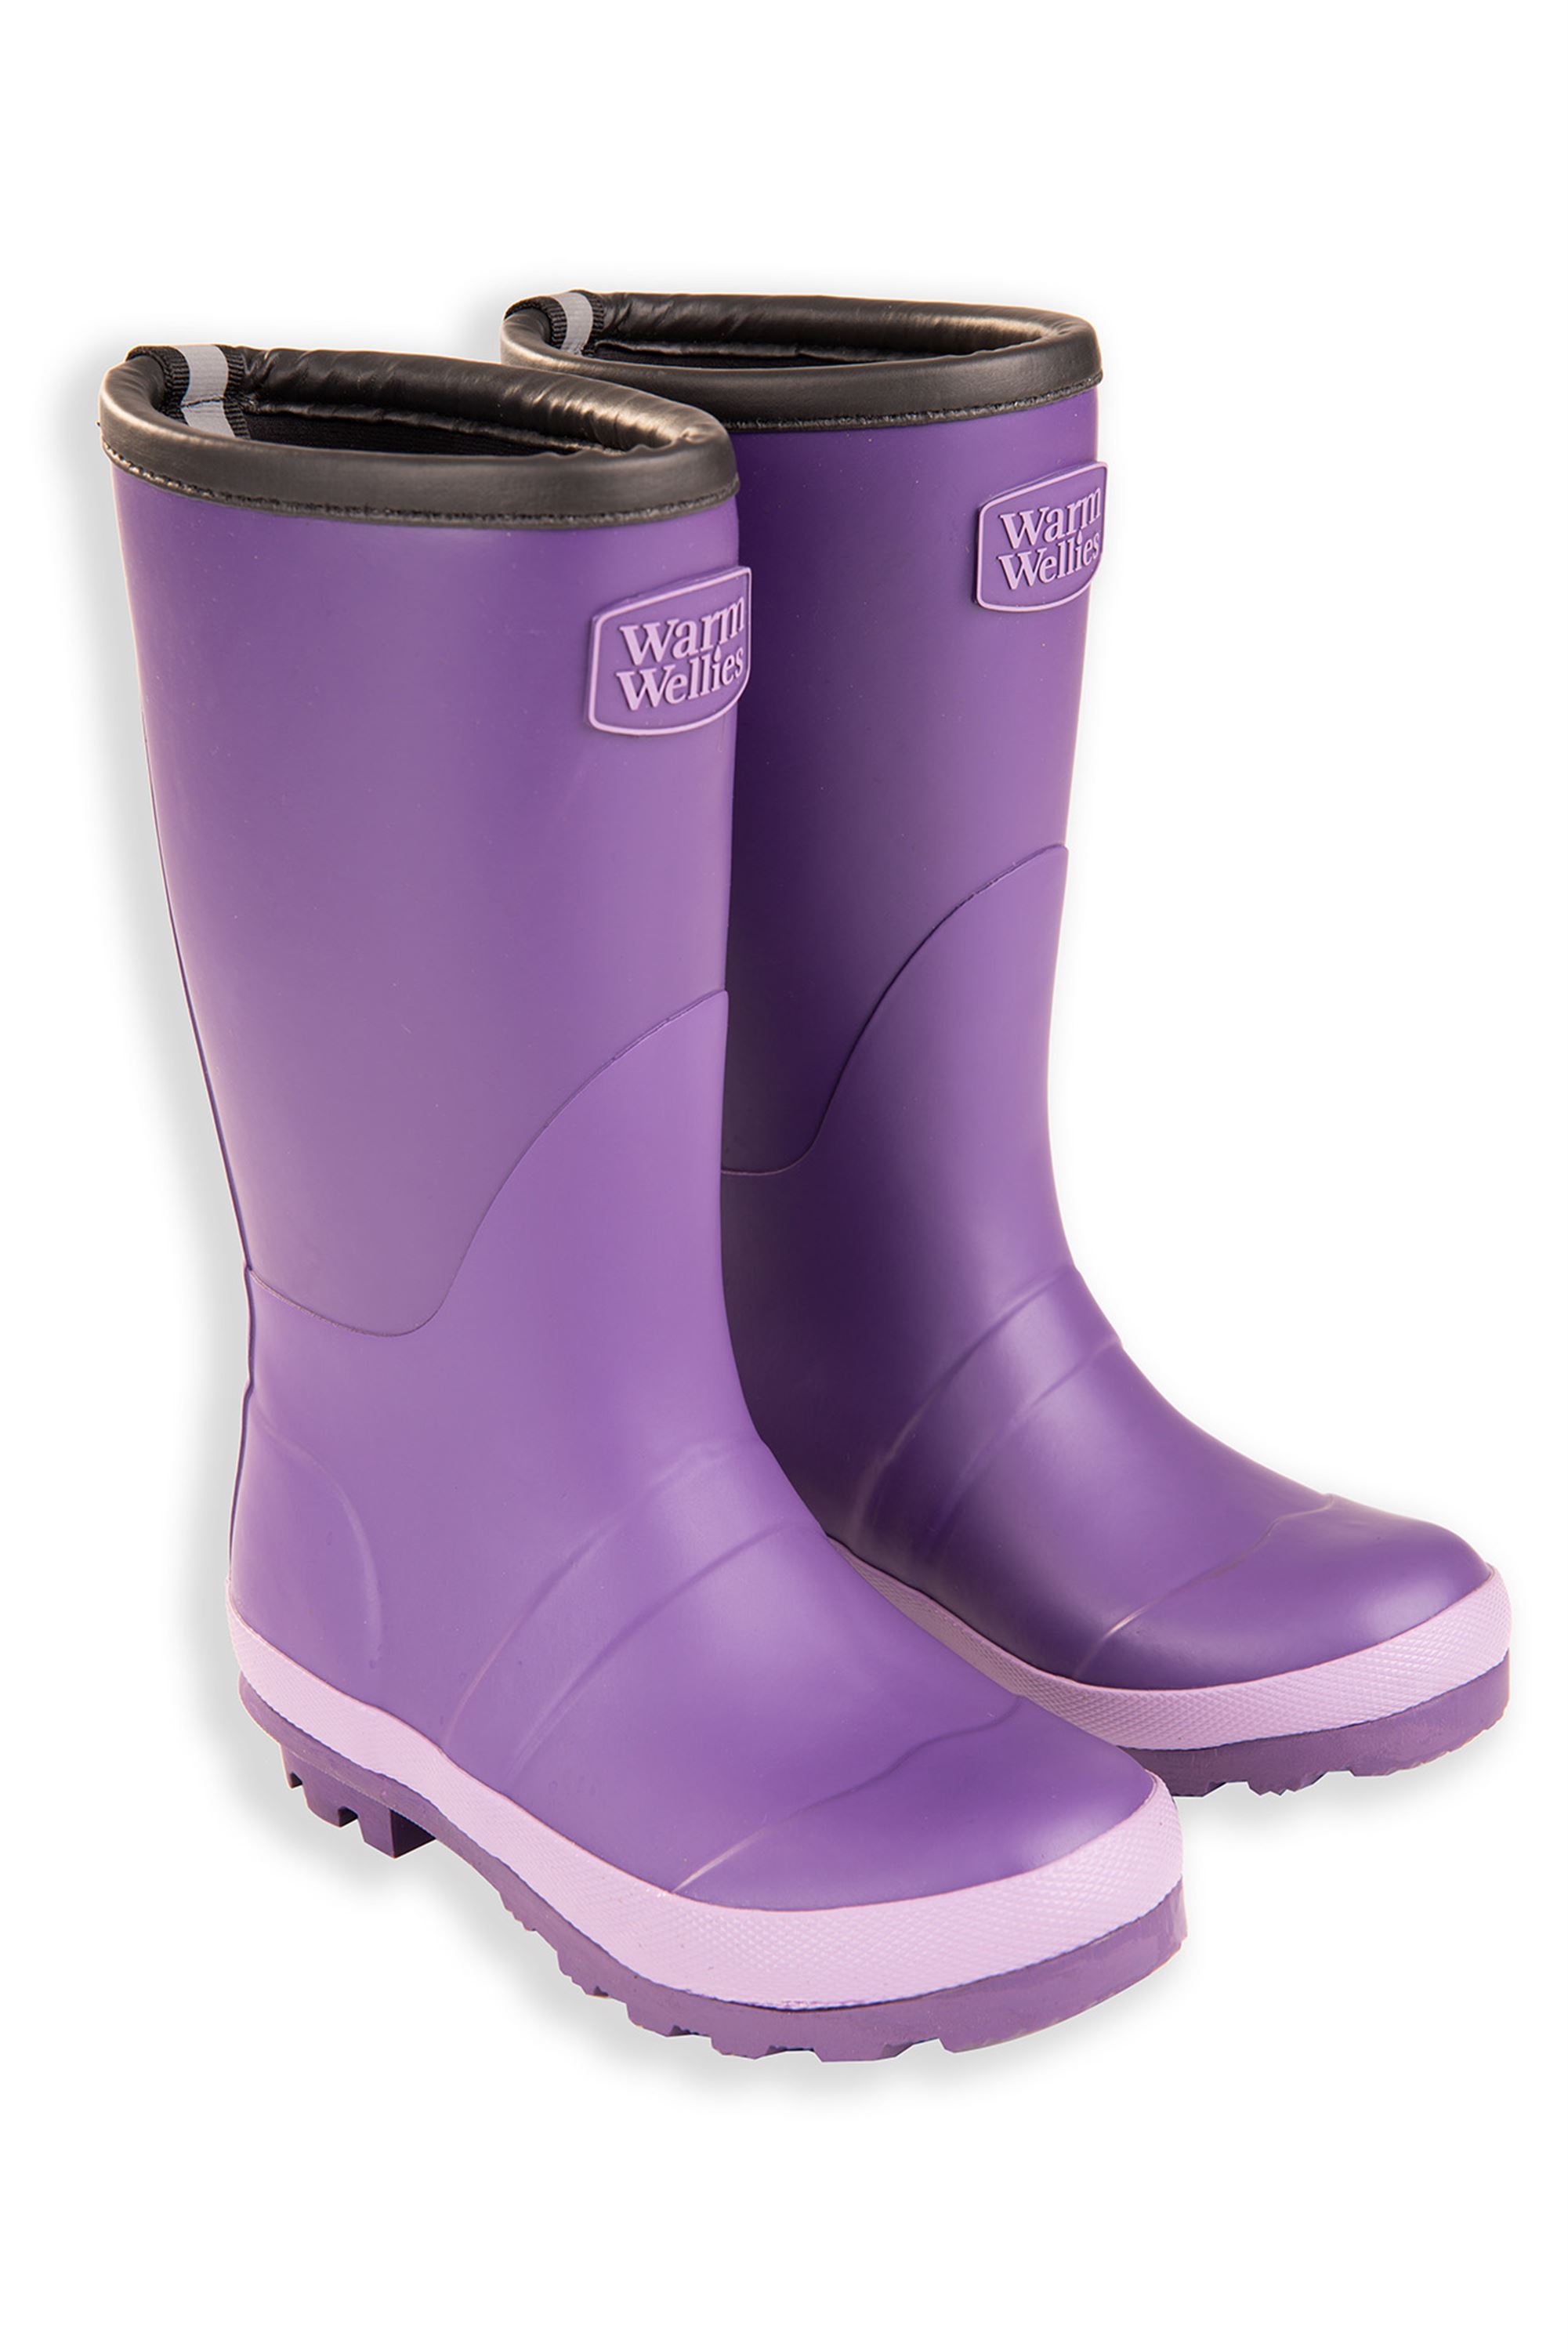 Buy > infant wellie boots > in stock